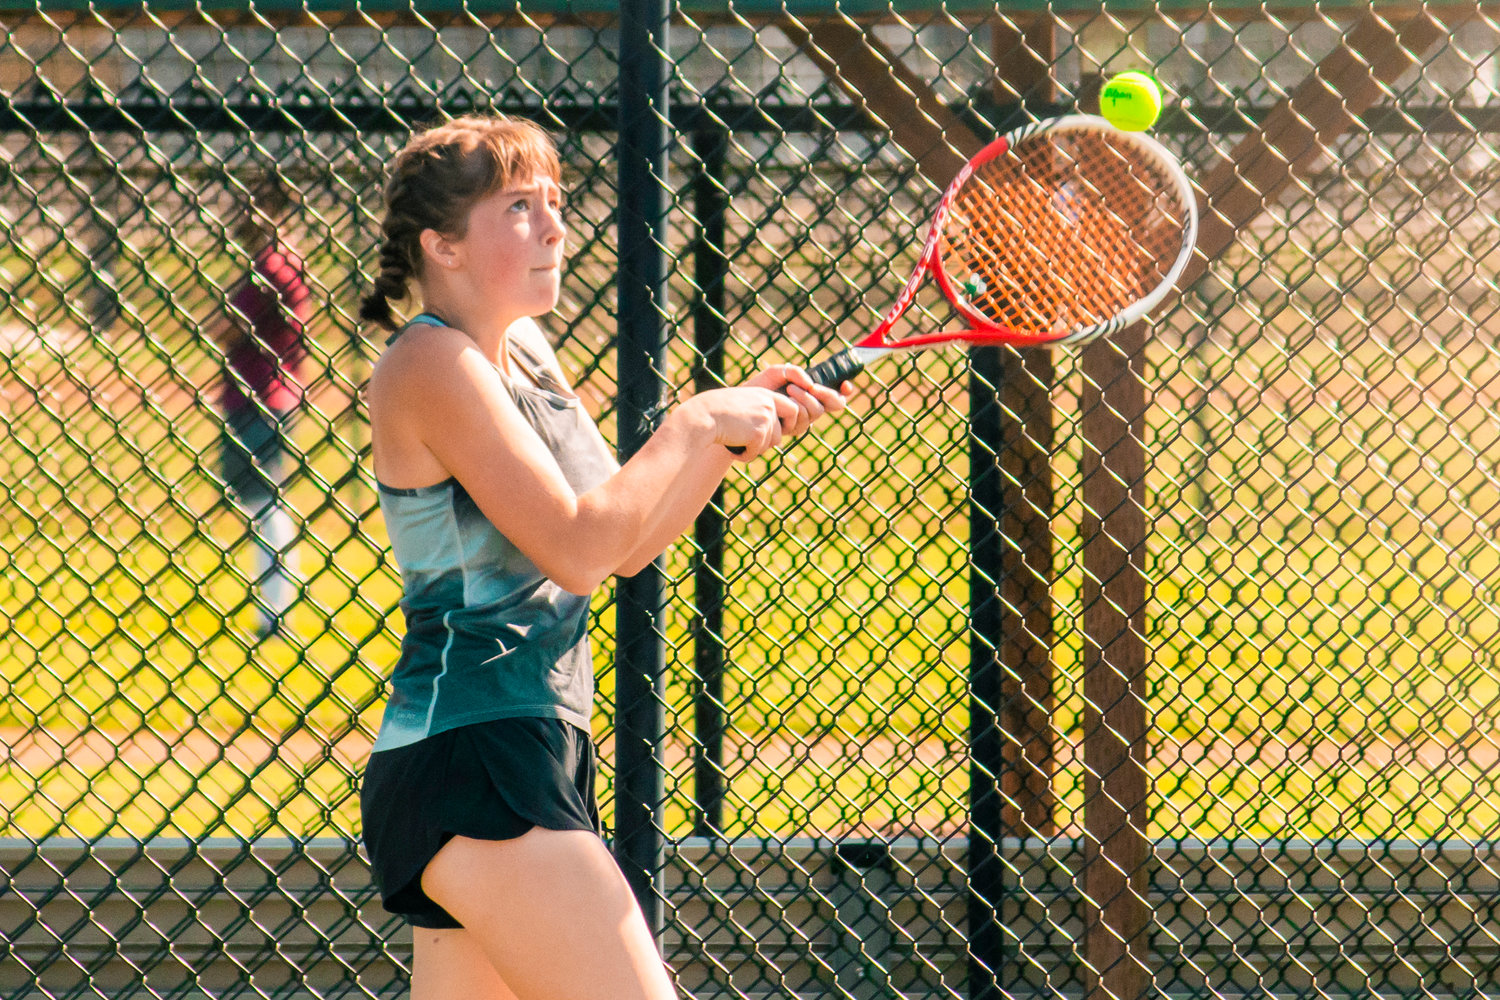 Centralia’s Liza Hopkins returns a ball during a tennis match against Tumwater Wednesday afternoon.